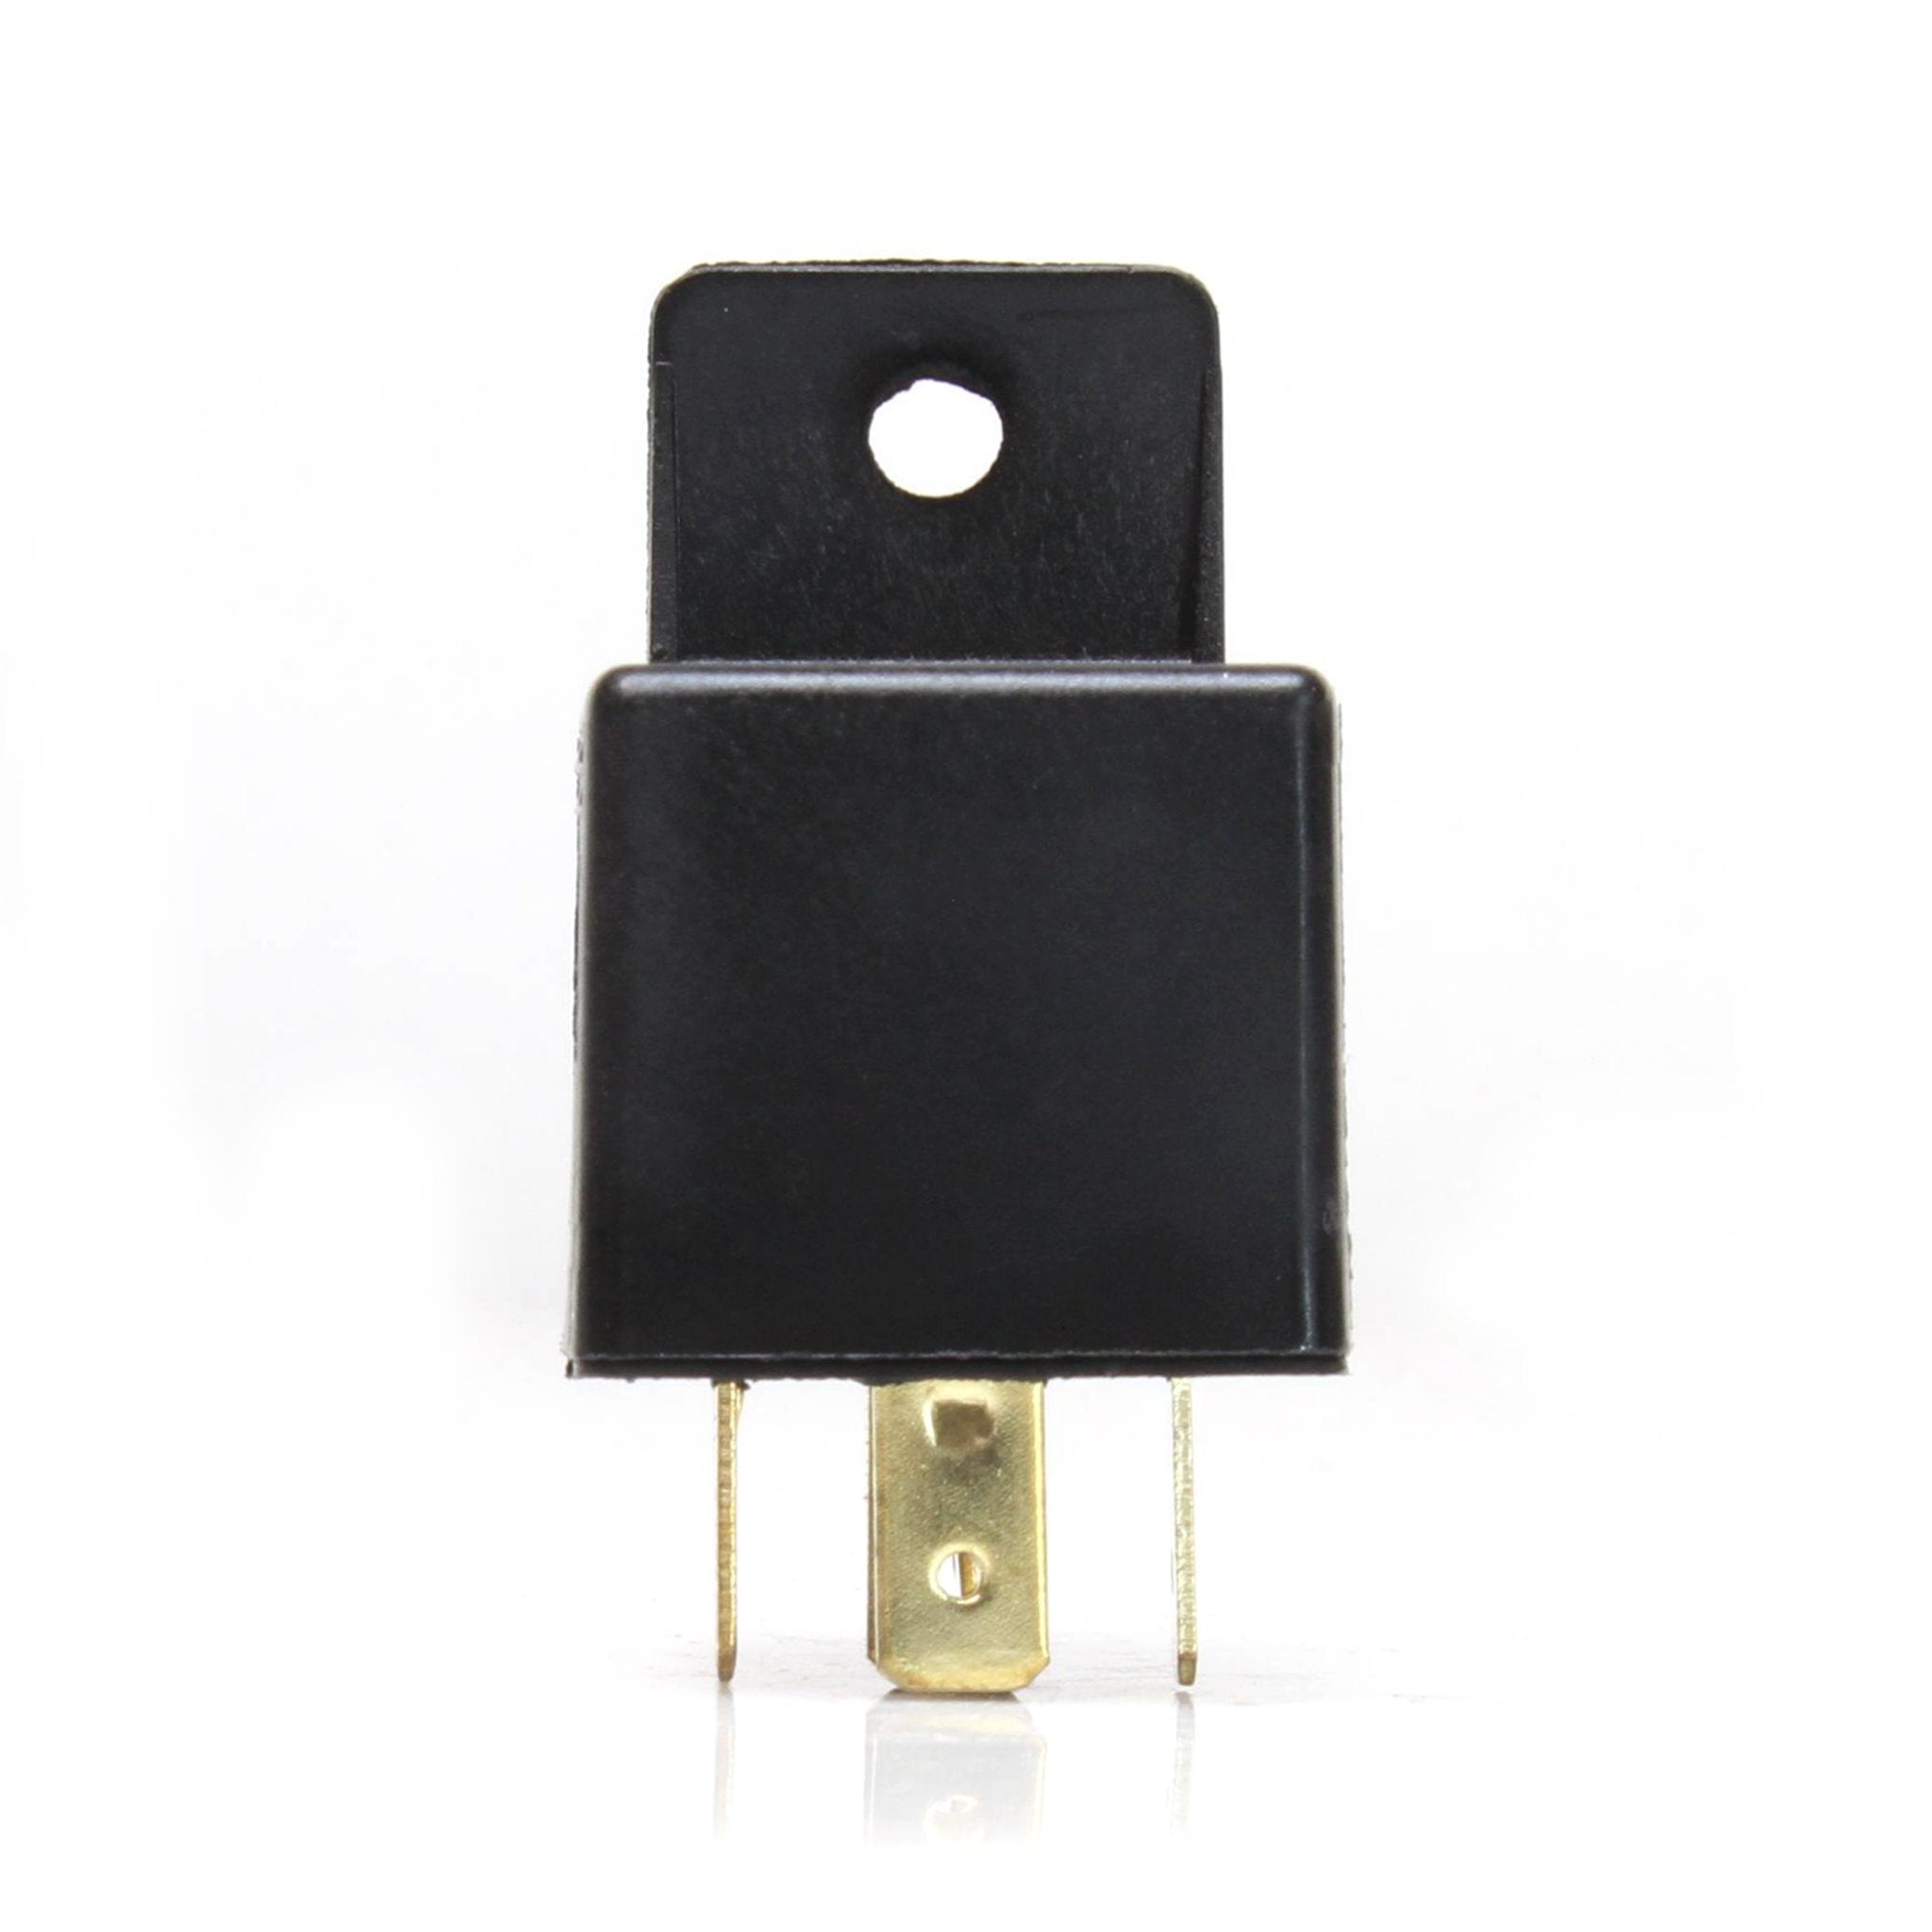 Heavy Duty 40A 12V DC 5-Pin SPDT Automotive Relay with Mounting Tab Universal